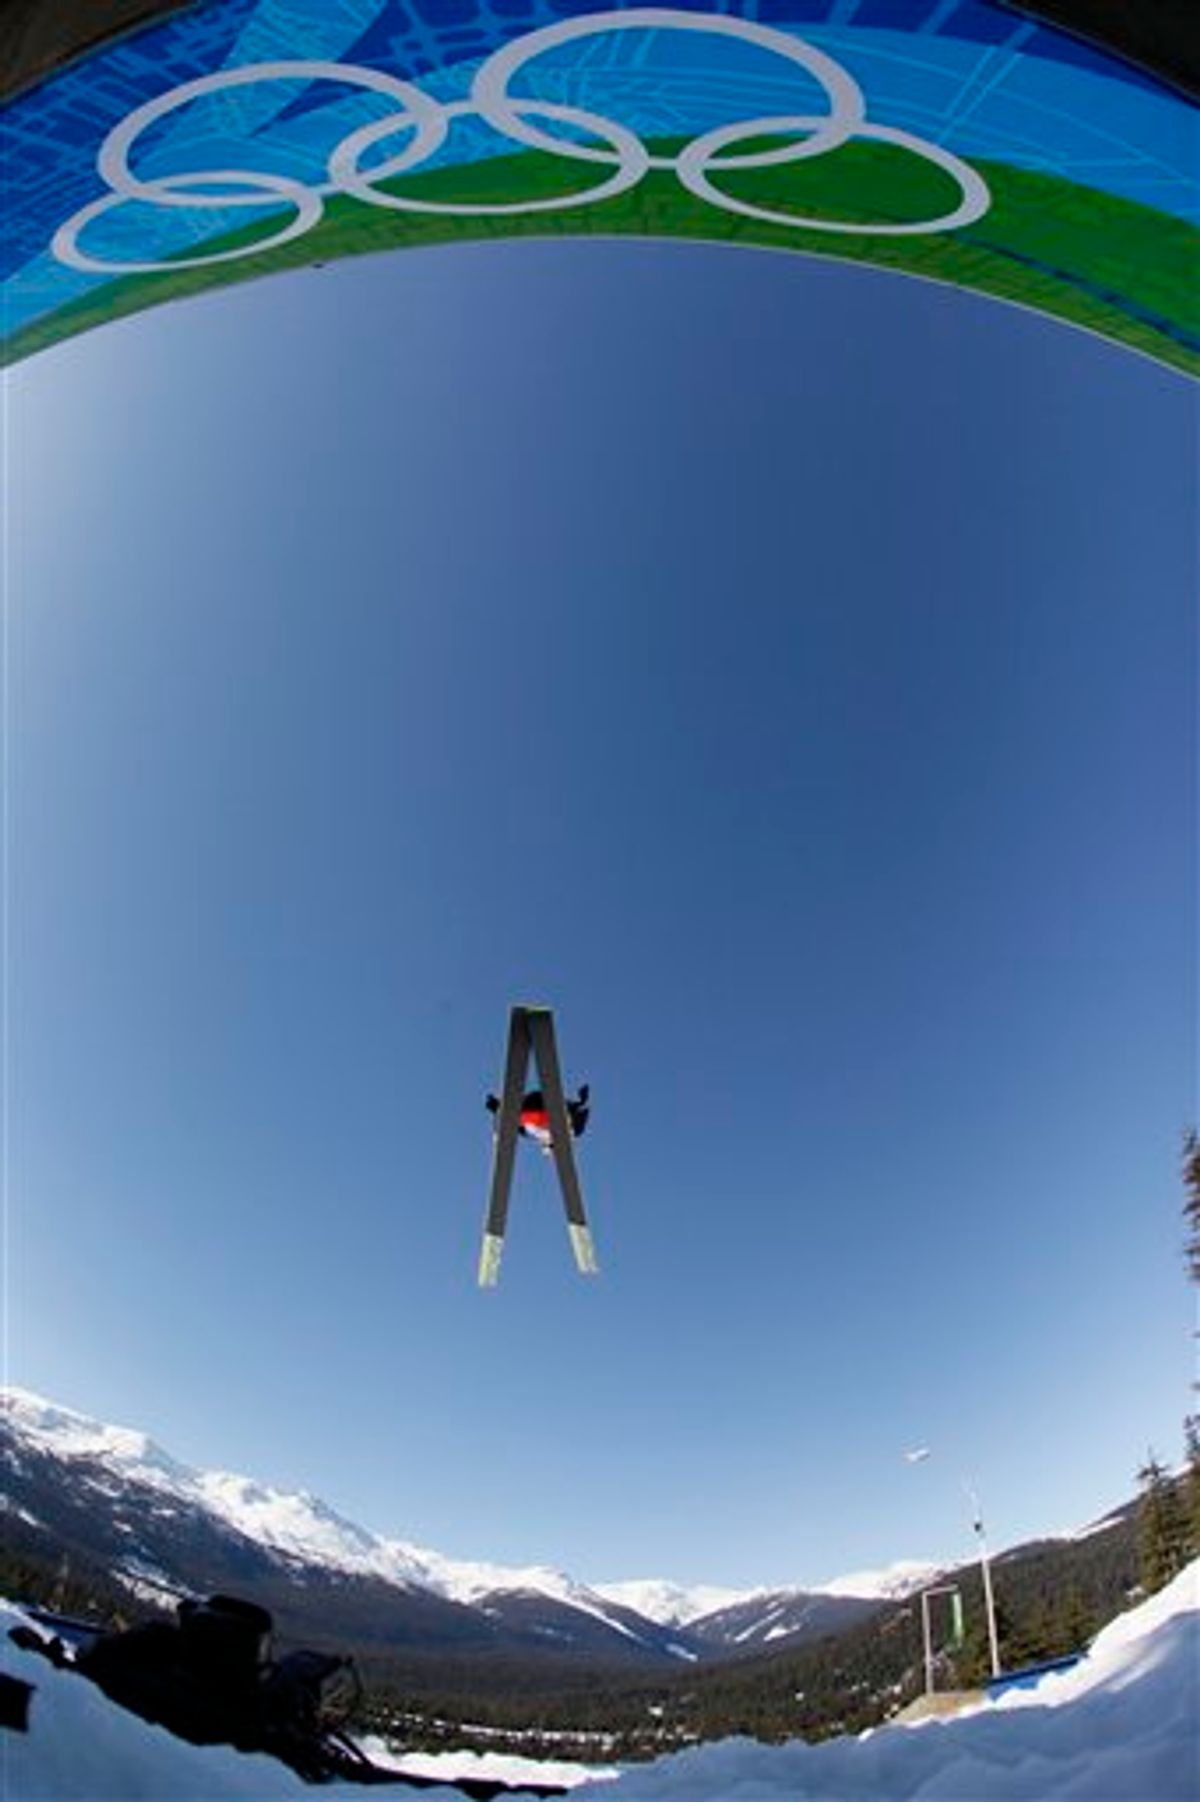 Switzerland's Simon Ammann makes his qualification jump during the Men's large hill ski jumping qualification round  at the Vancouver 2010 Olympics in Whistler, British Columbia, Canada, Friday, Feb. 19, 2010. (AP Photo/Dmitry Lovetsky) (AP)